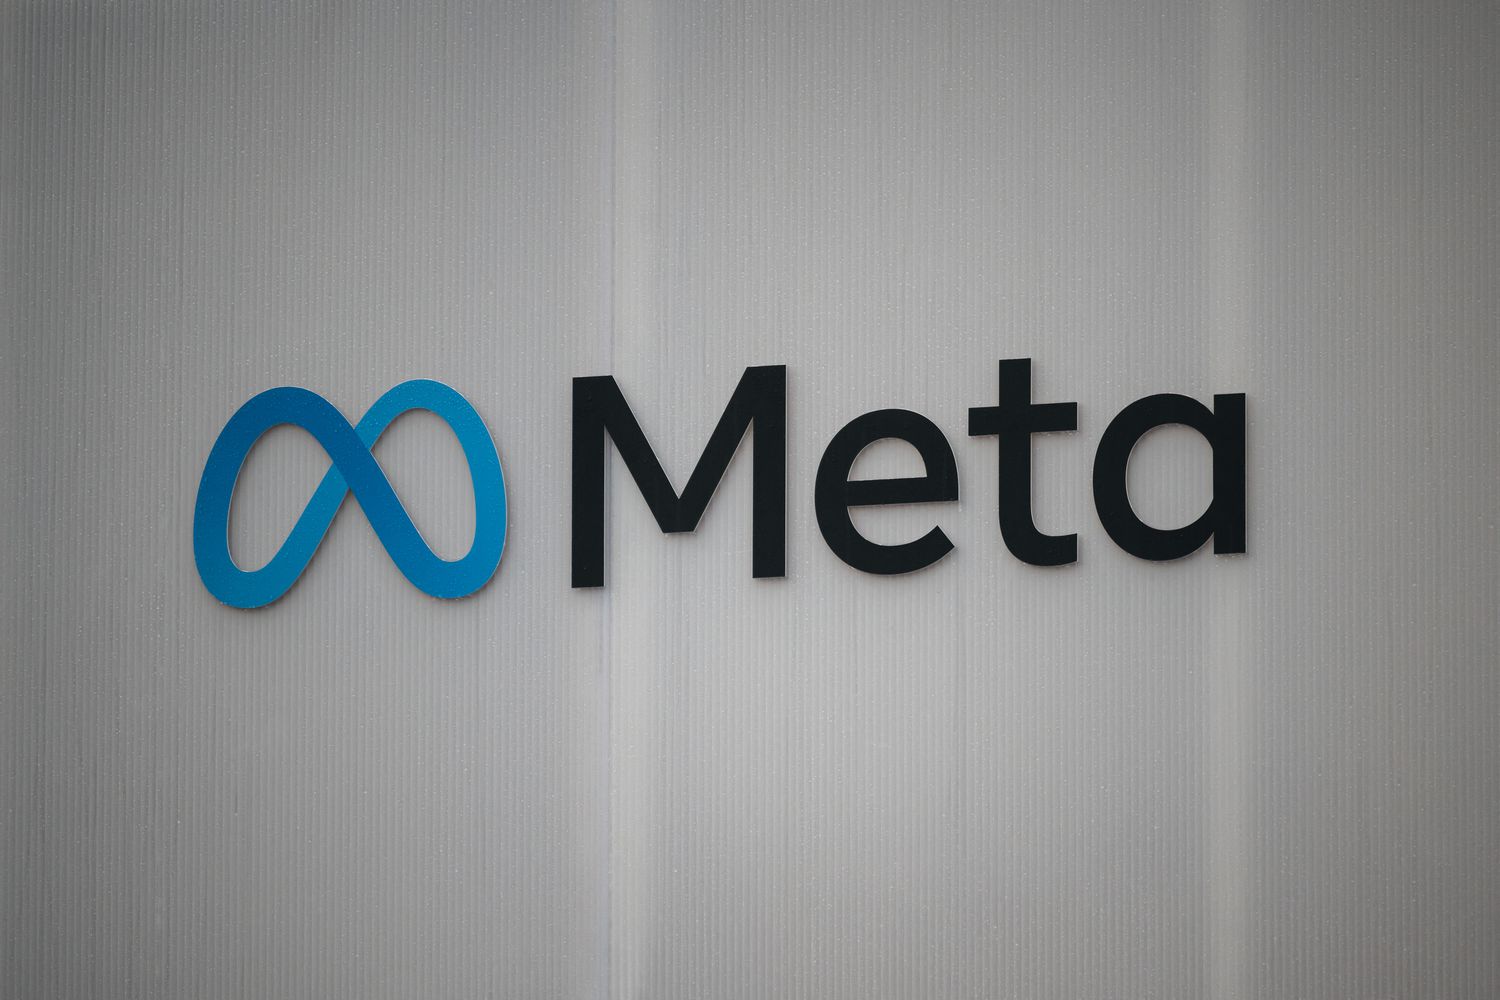 What You Need To Know Ahead of Meta’s Earnings Report [Video]